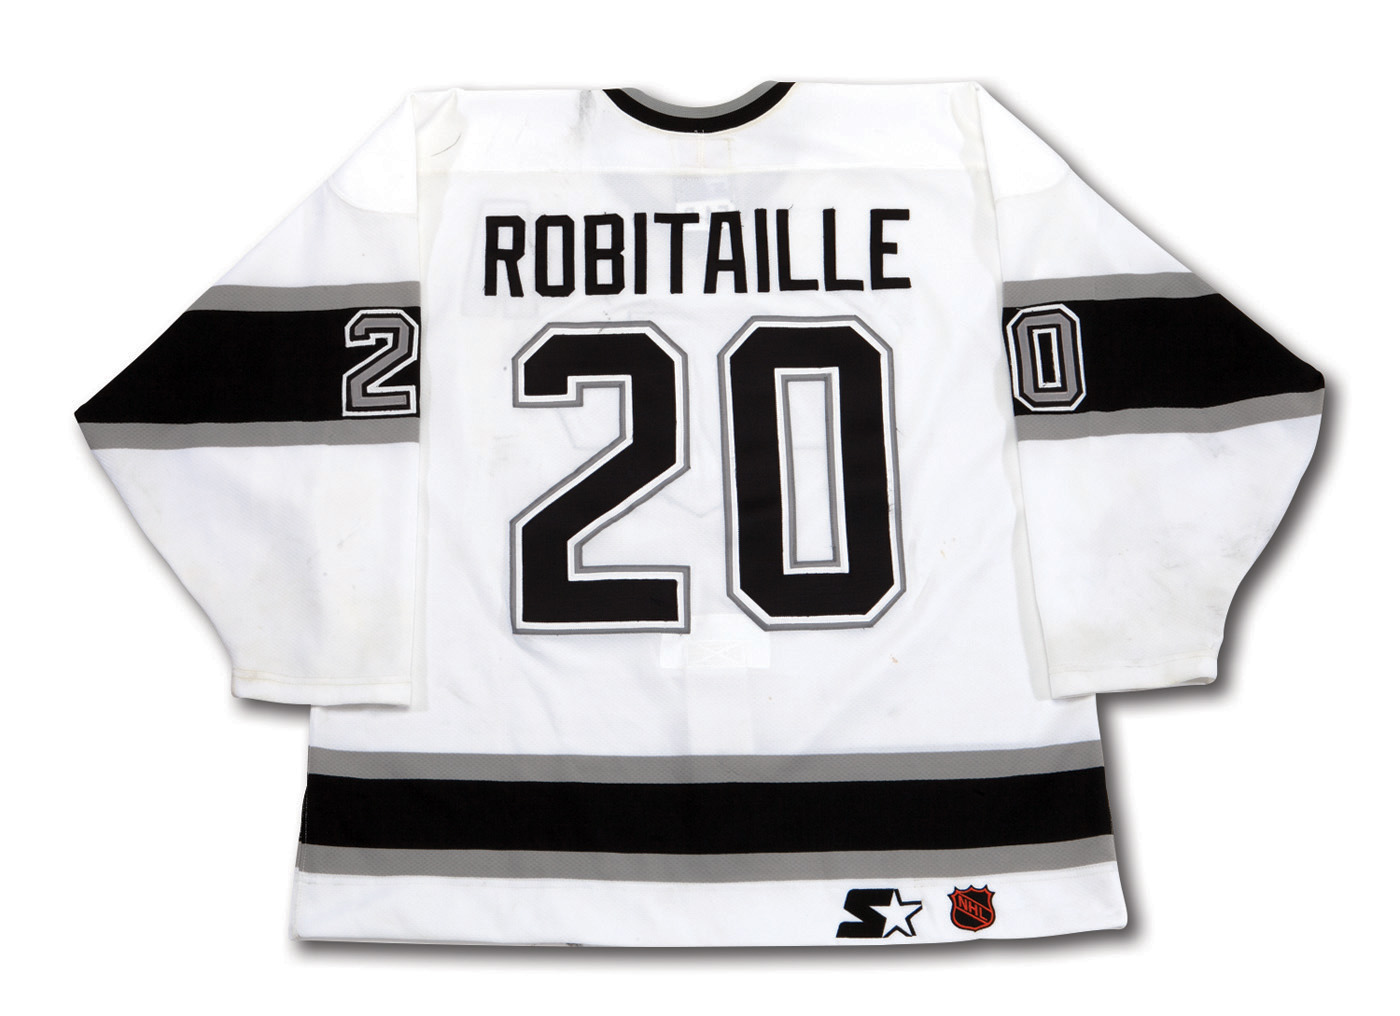 Luc Robitaille LA Kings Autographed Signed & Inscribed Career